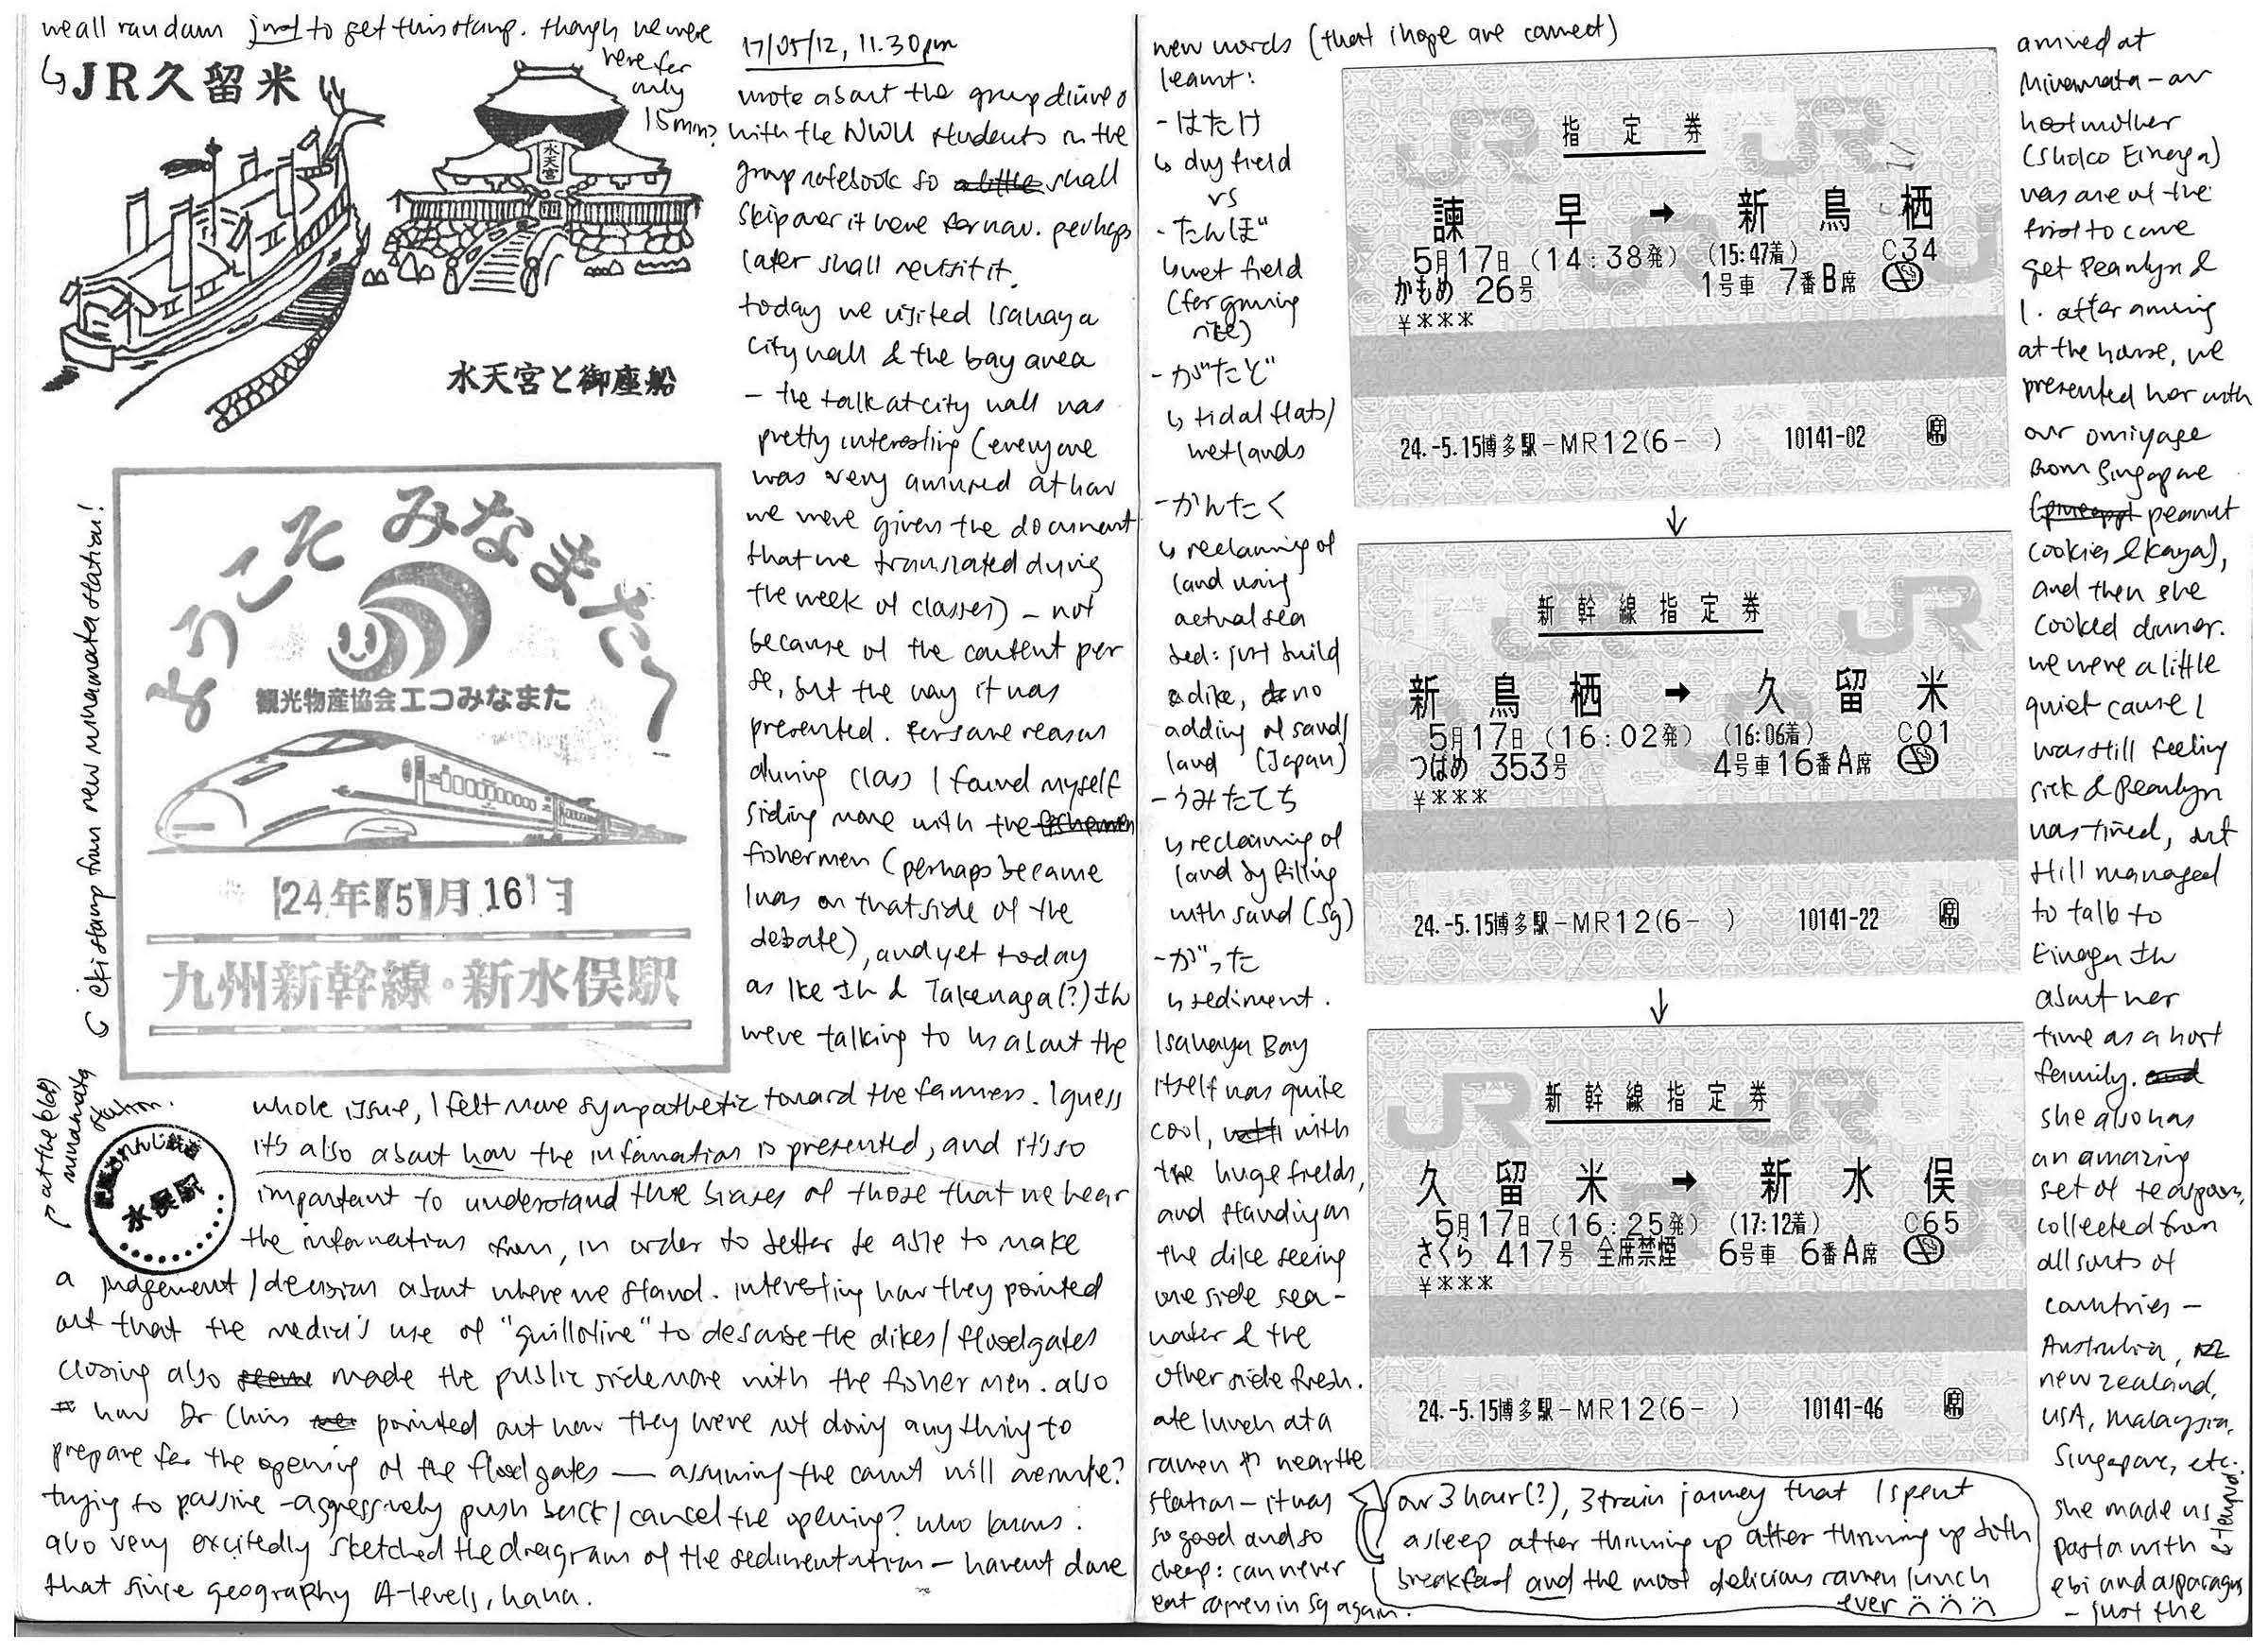 Scan of a student's field notes. Has images, diagrams, stamps, and notes.